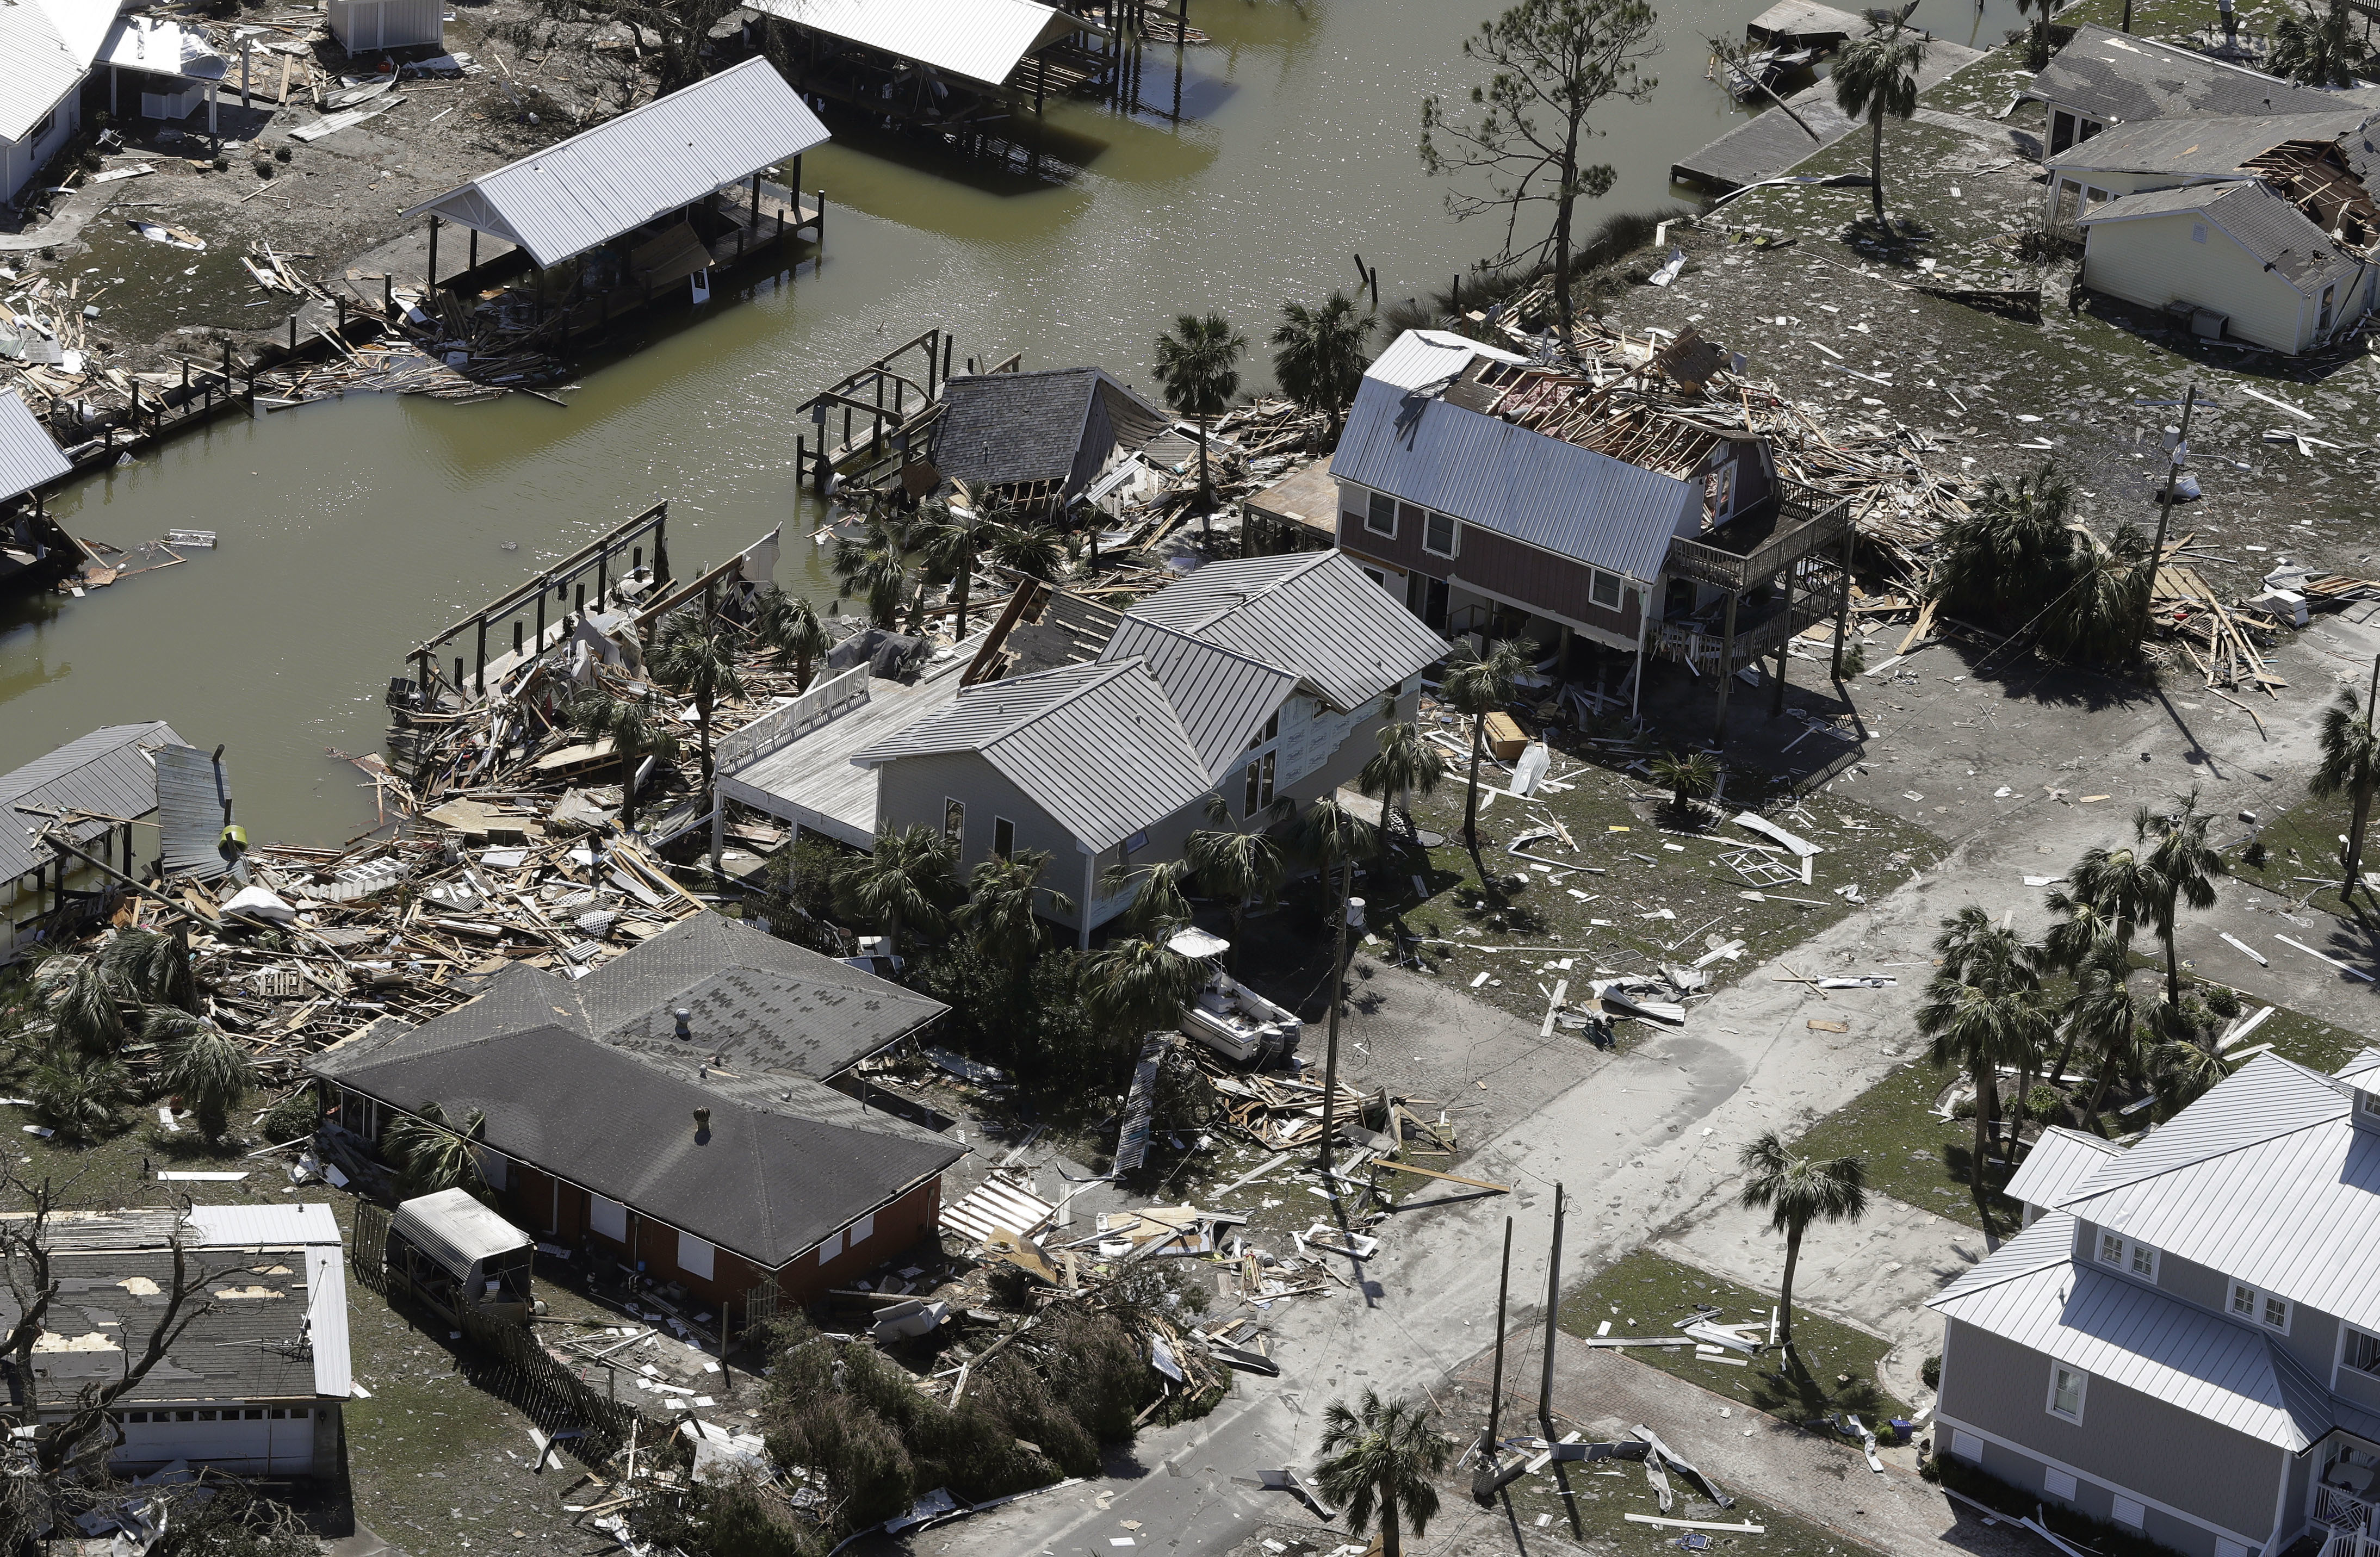 Panama City, FL Death Toll From Hurricane Michael Rises To 12 Amid